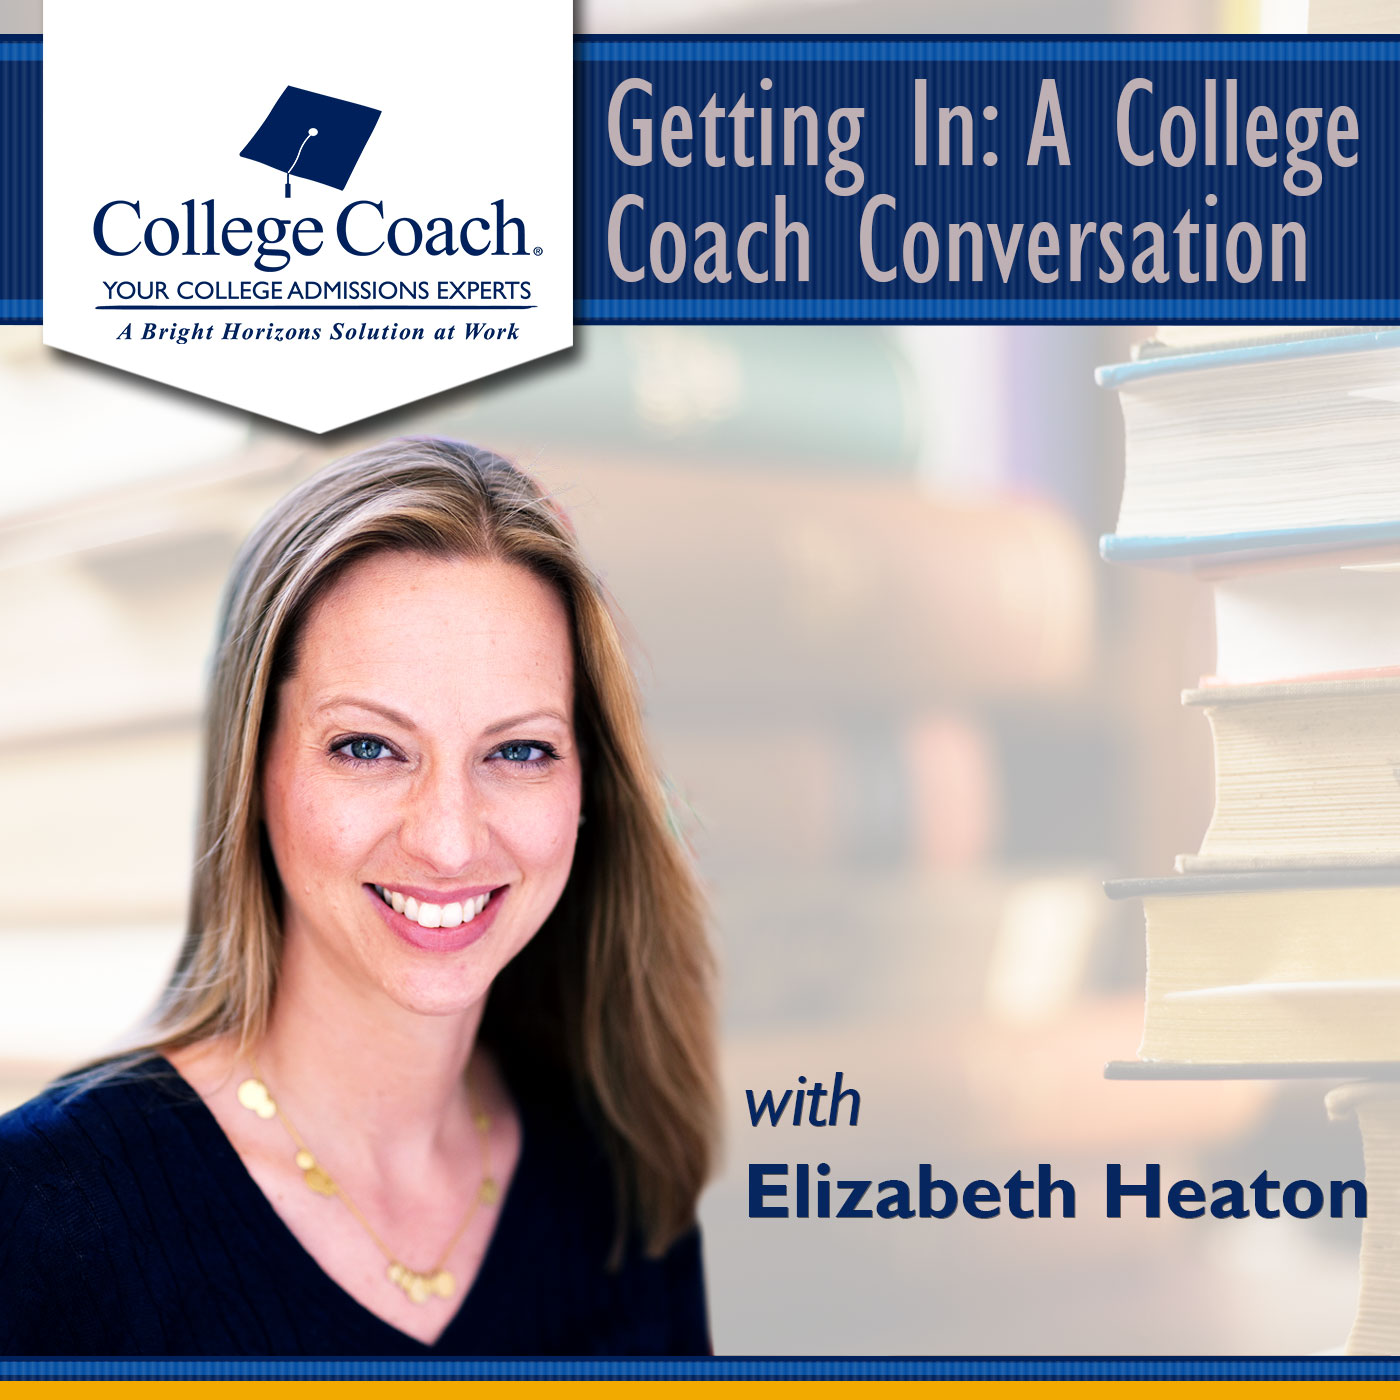 Office Hours: Summer College Visits; Evaluating College Career Services Offices; Your College Finance Questions By Elizabeth Heaton